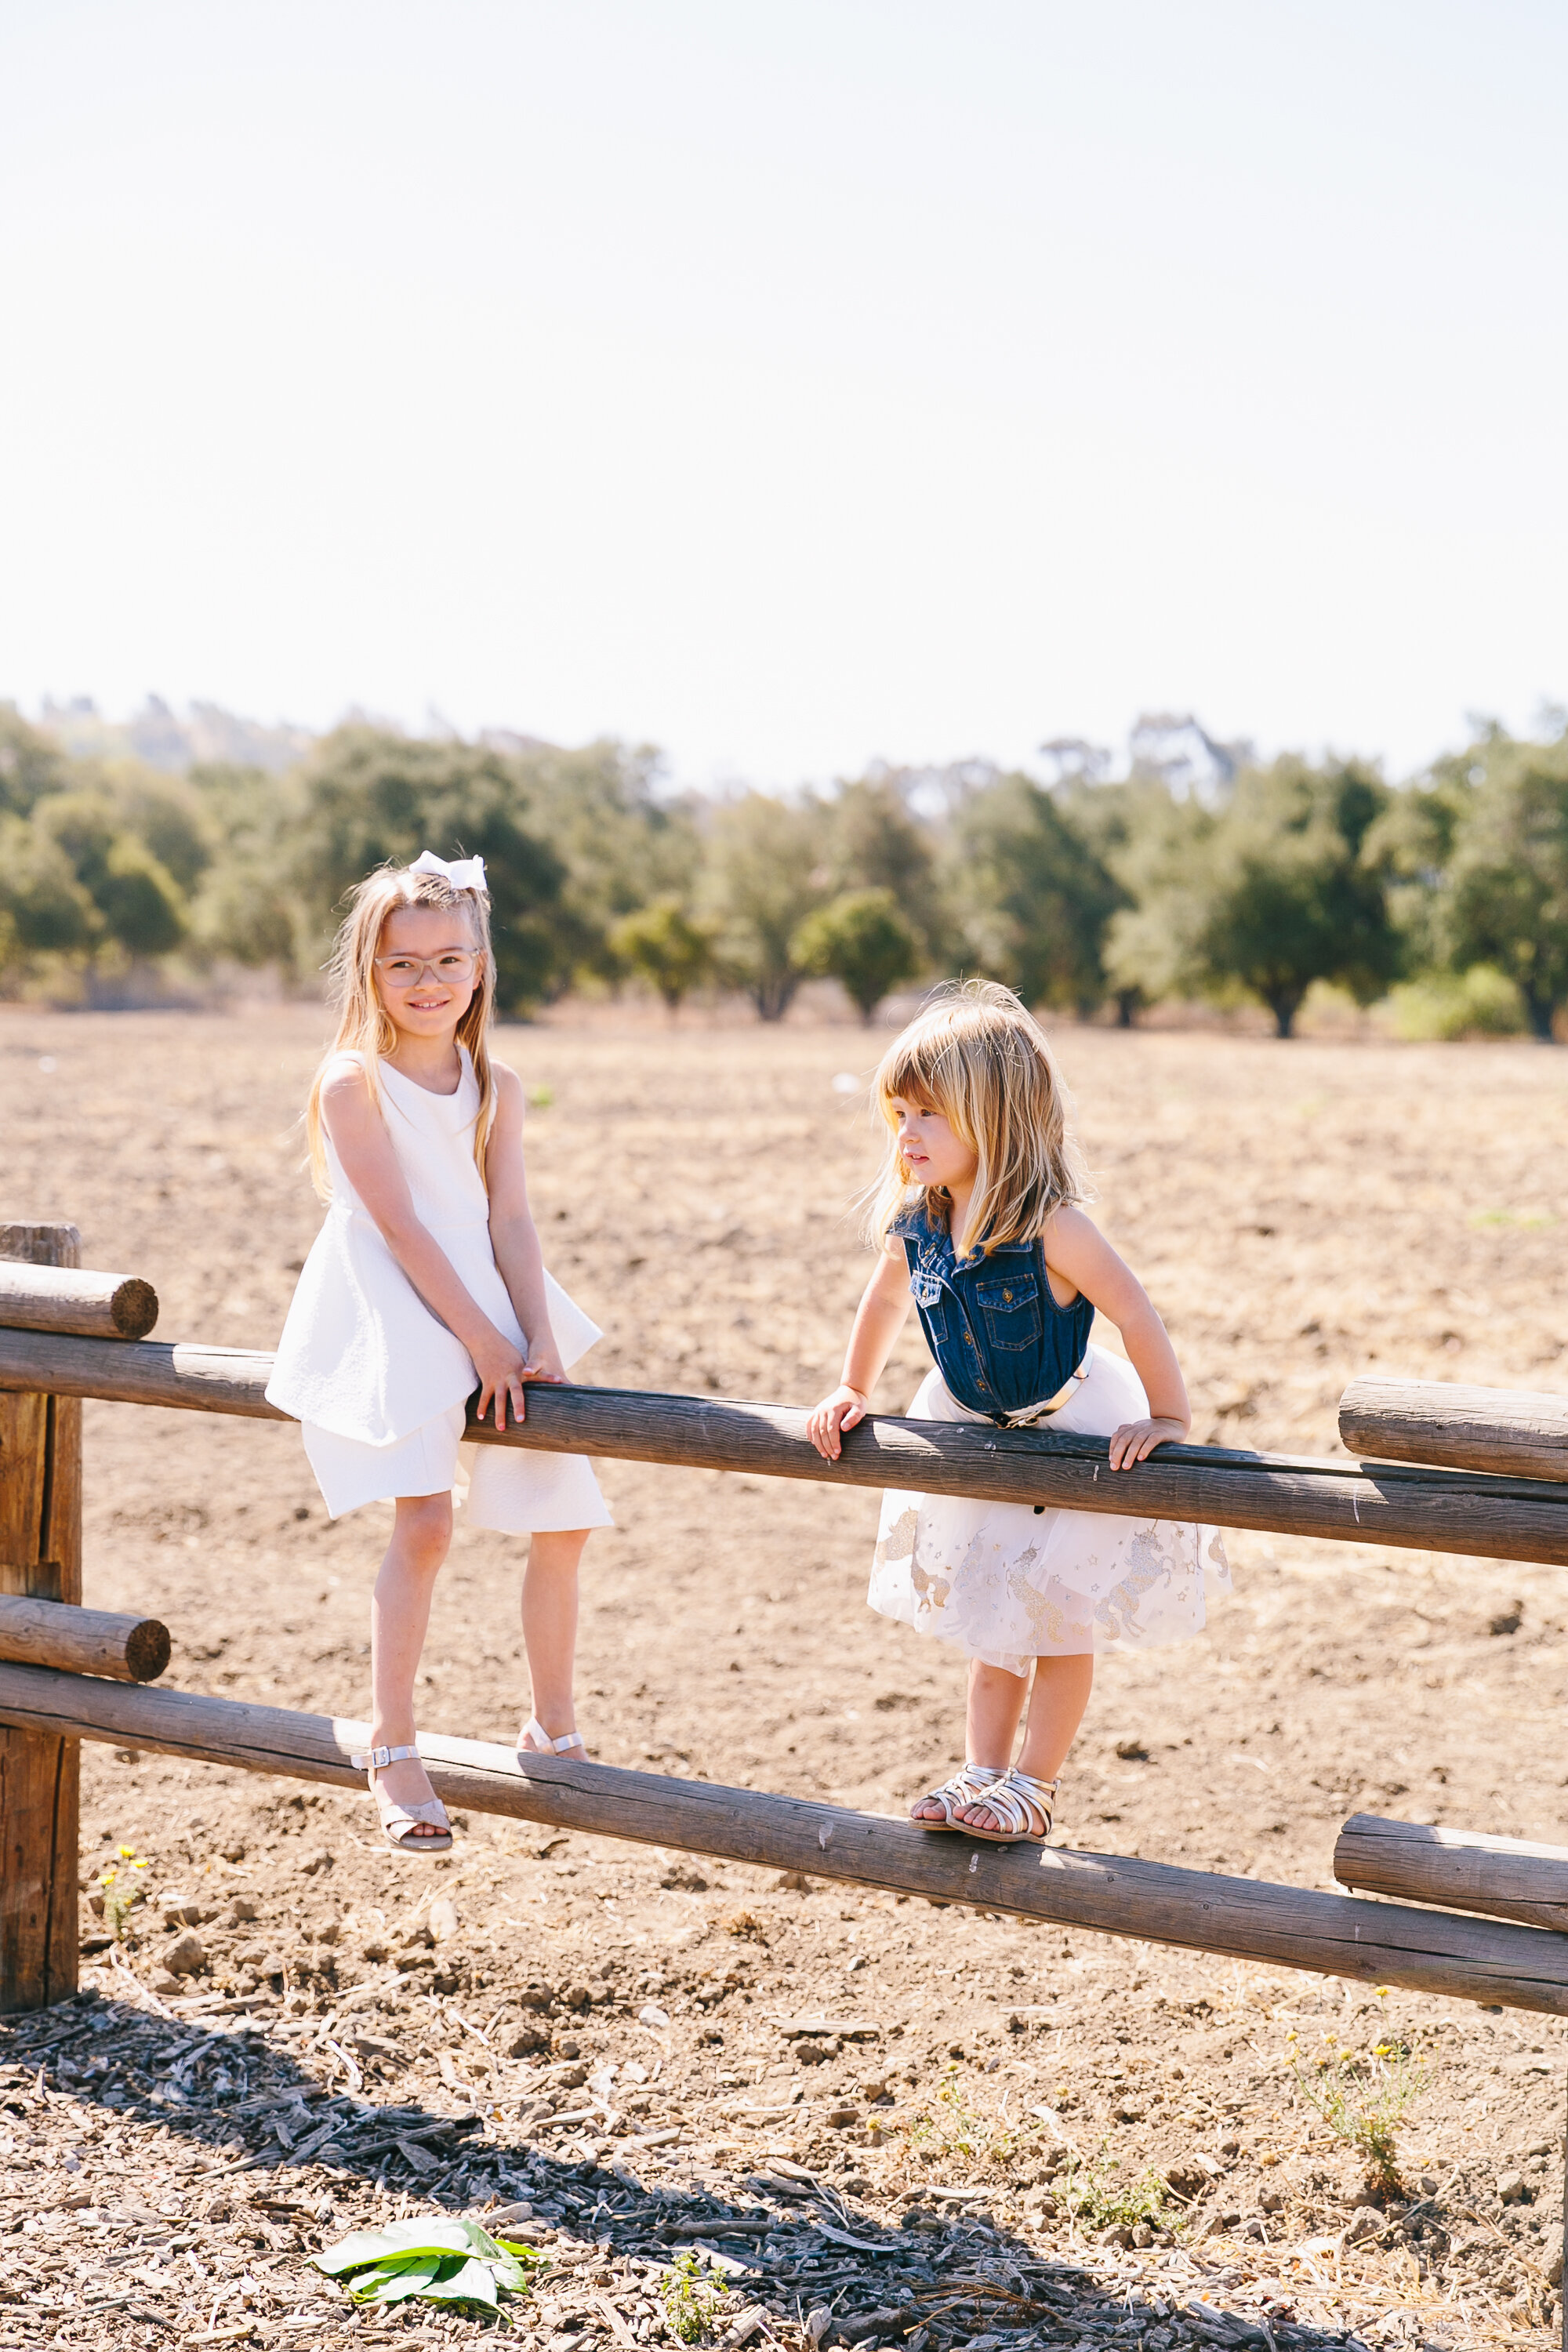 Los_Angeles_Family_Photography_Orange_County_Children_Babies_Field_Farm_Outdoors_Morning_Session_California_Girls_Boys_Kids_Photography-1385.jpg